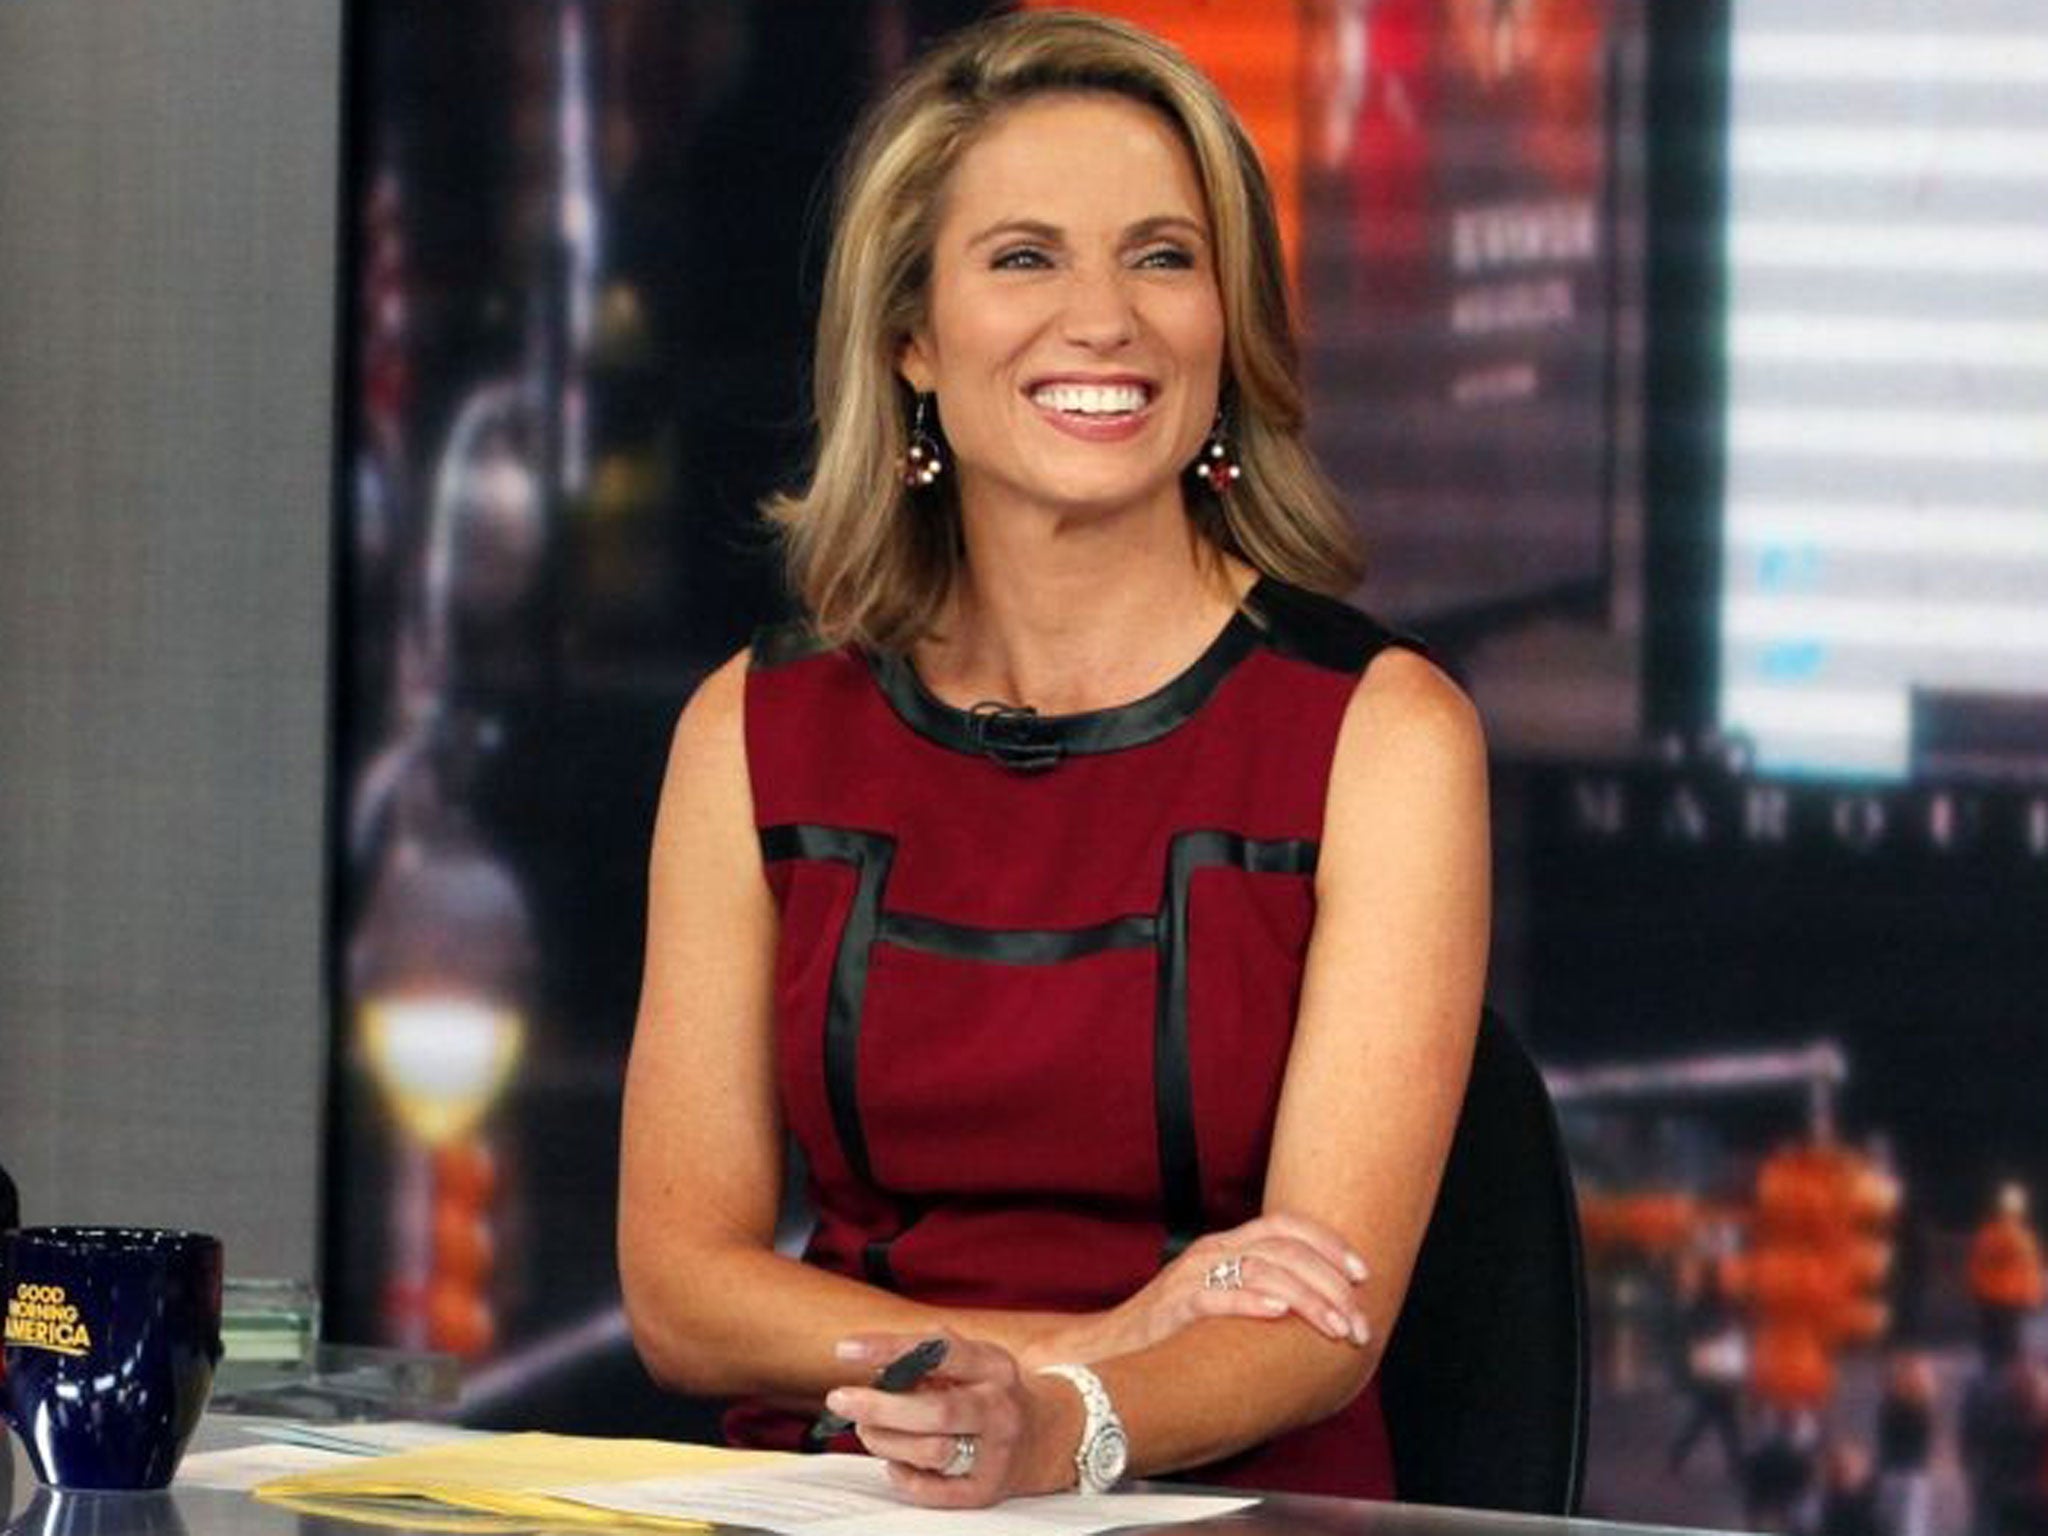 ABC shows co-host Amy Robach during a broadcast of "Good Morning America," in New York